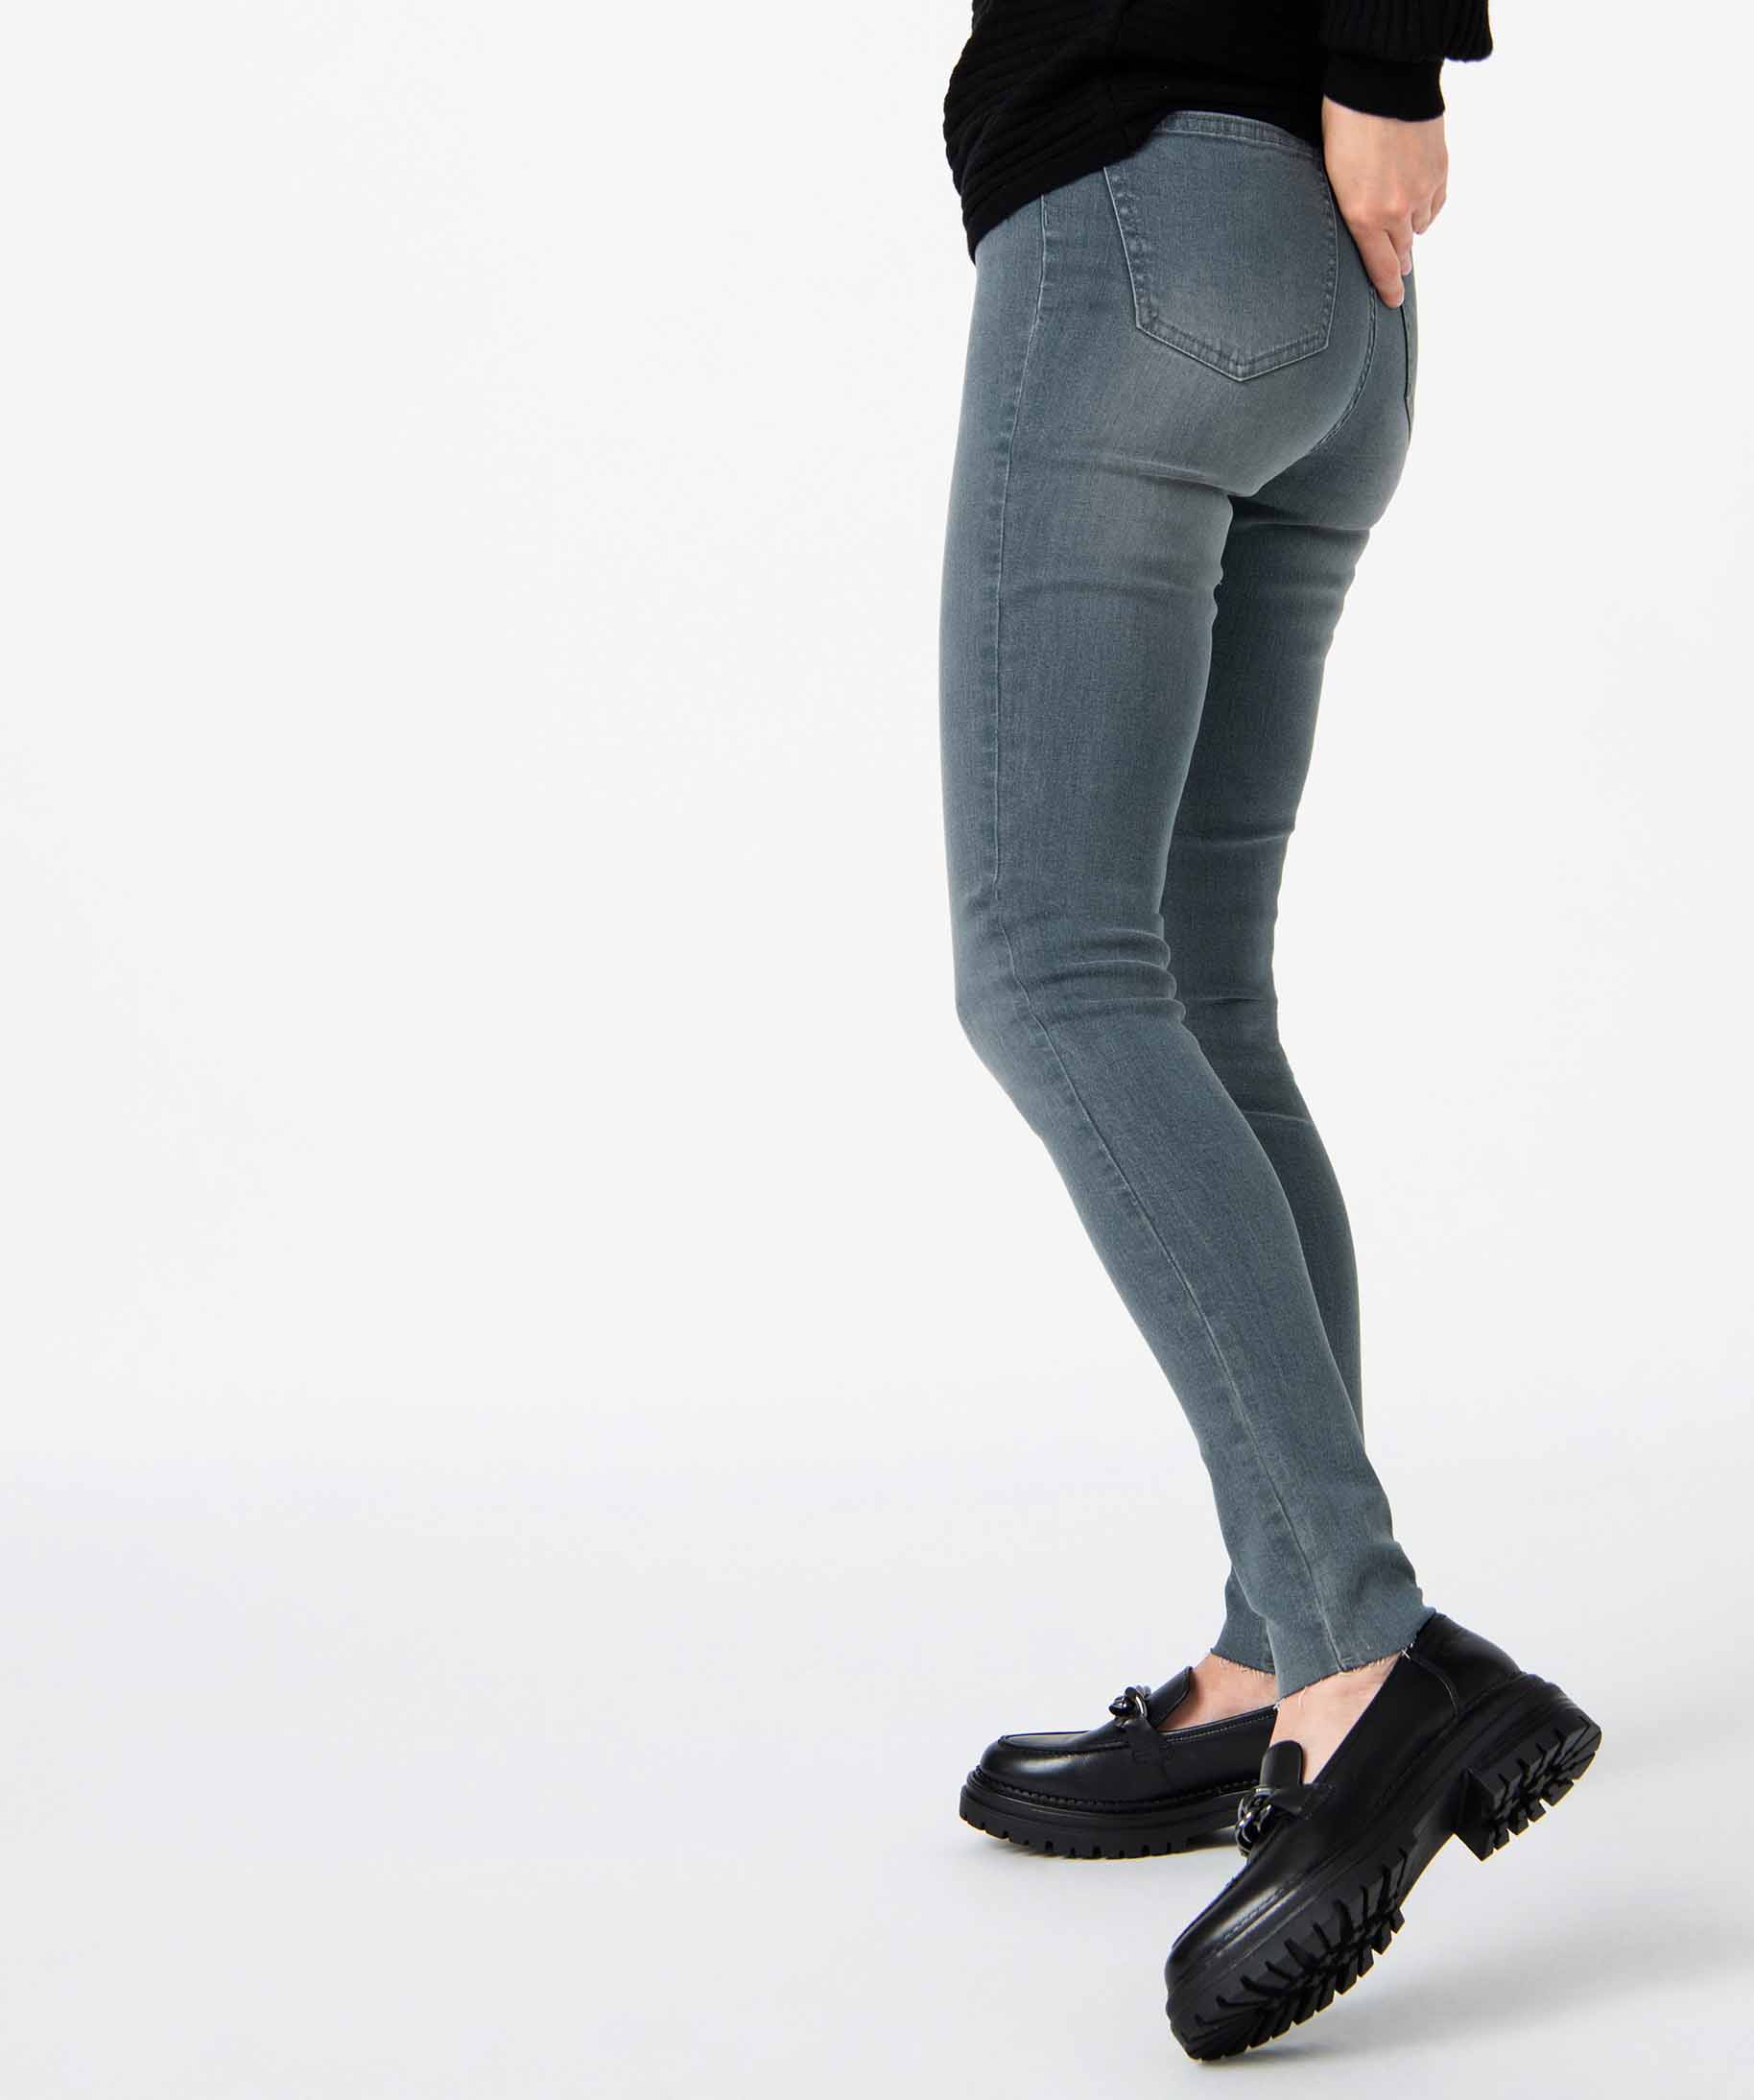 jean femme coupe skinny taille haute gris